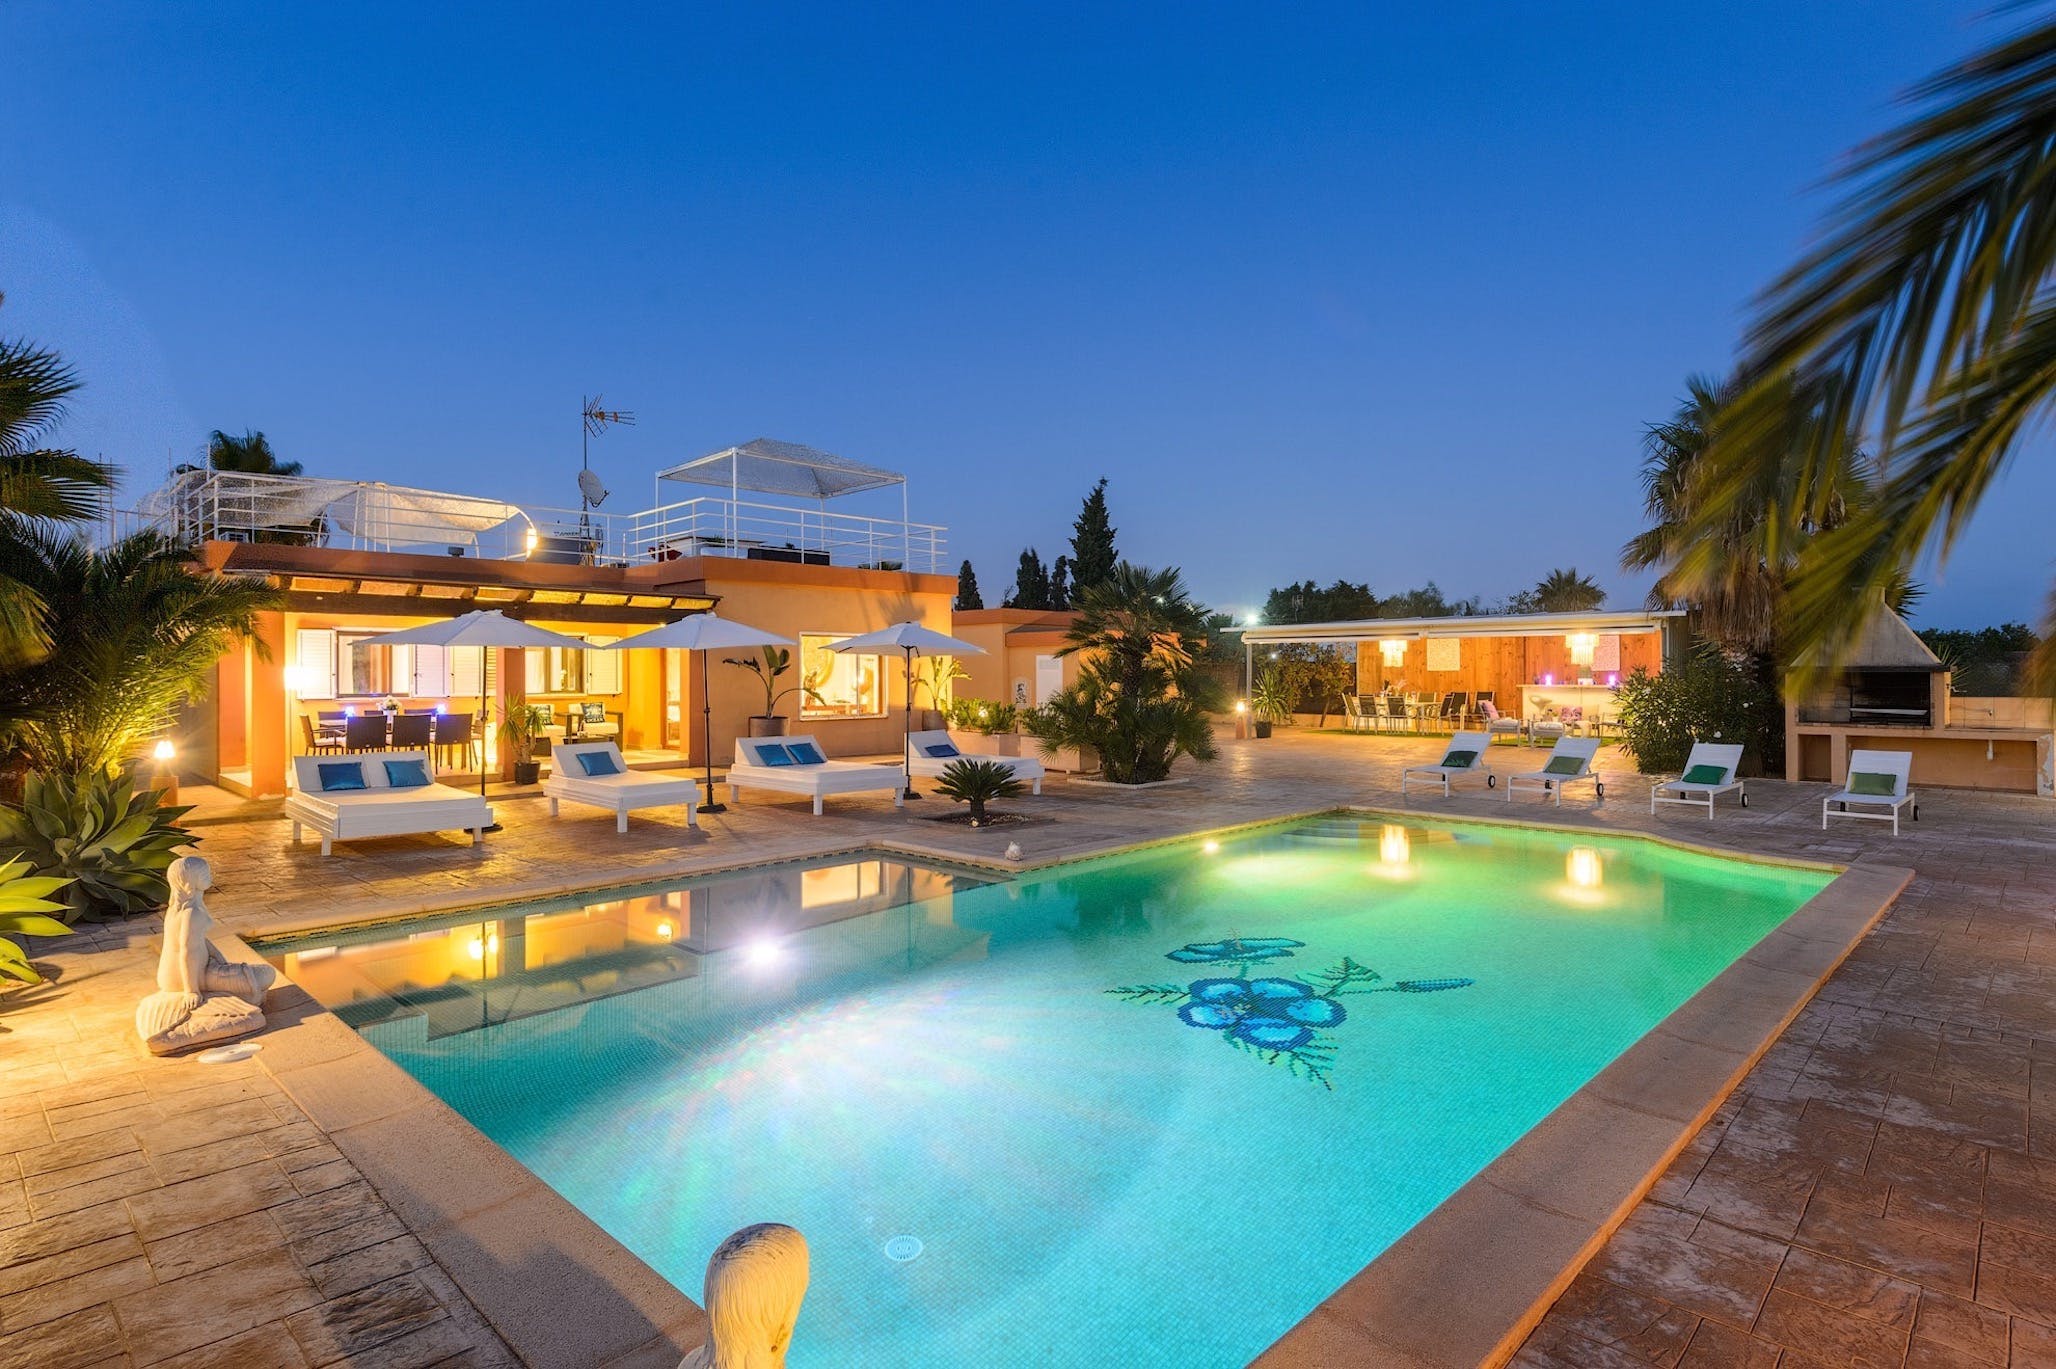 You are currently viewing Villa D’Angelo – ‘Fun, modern villa with pool, close to Ibiza town.’